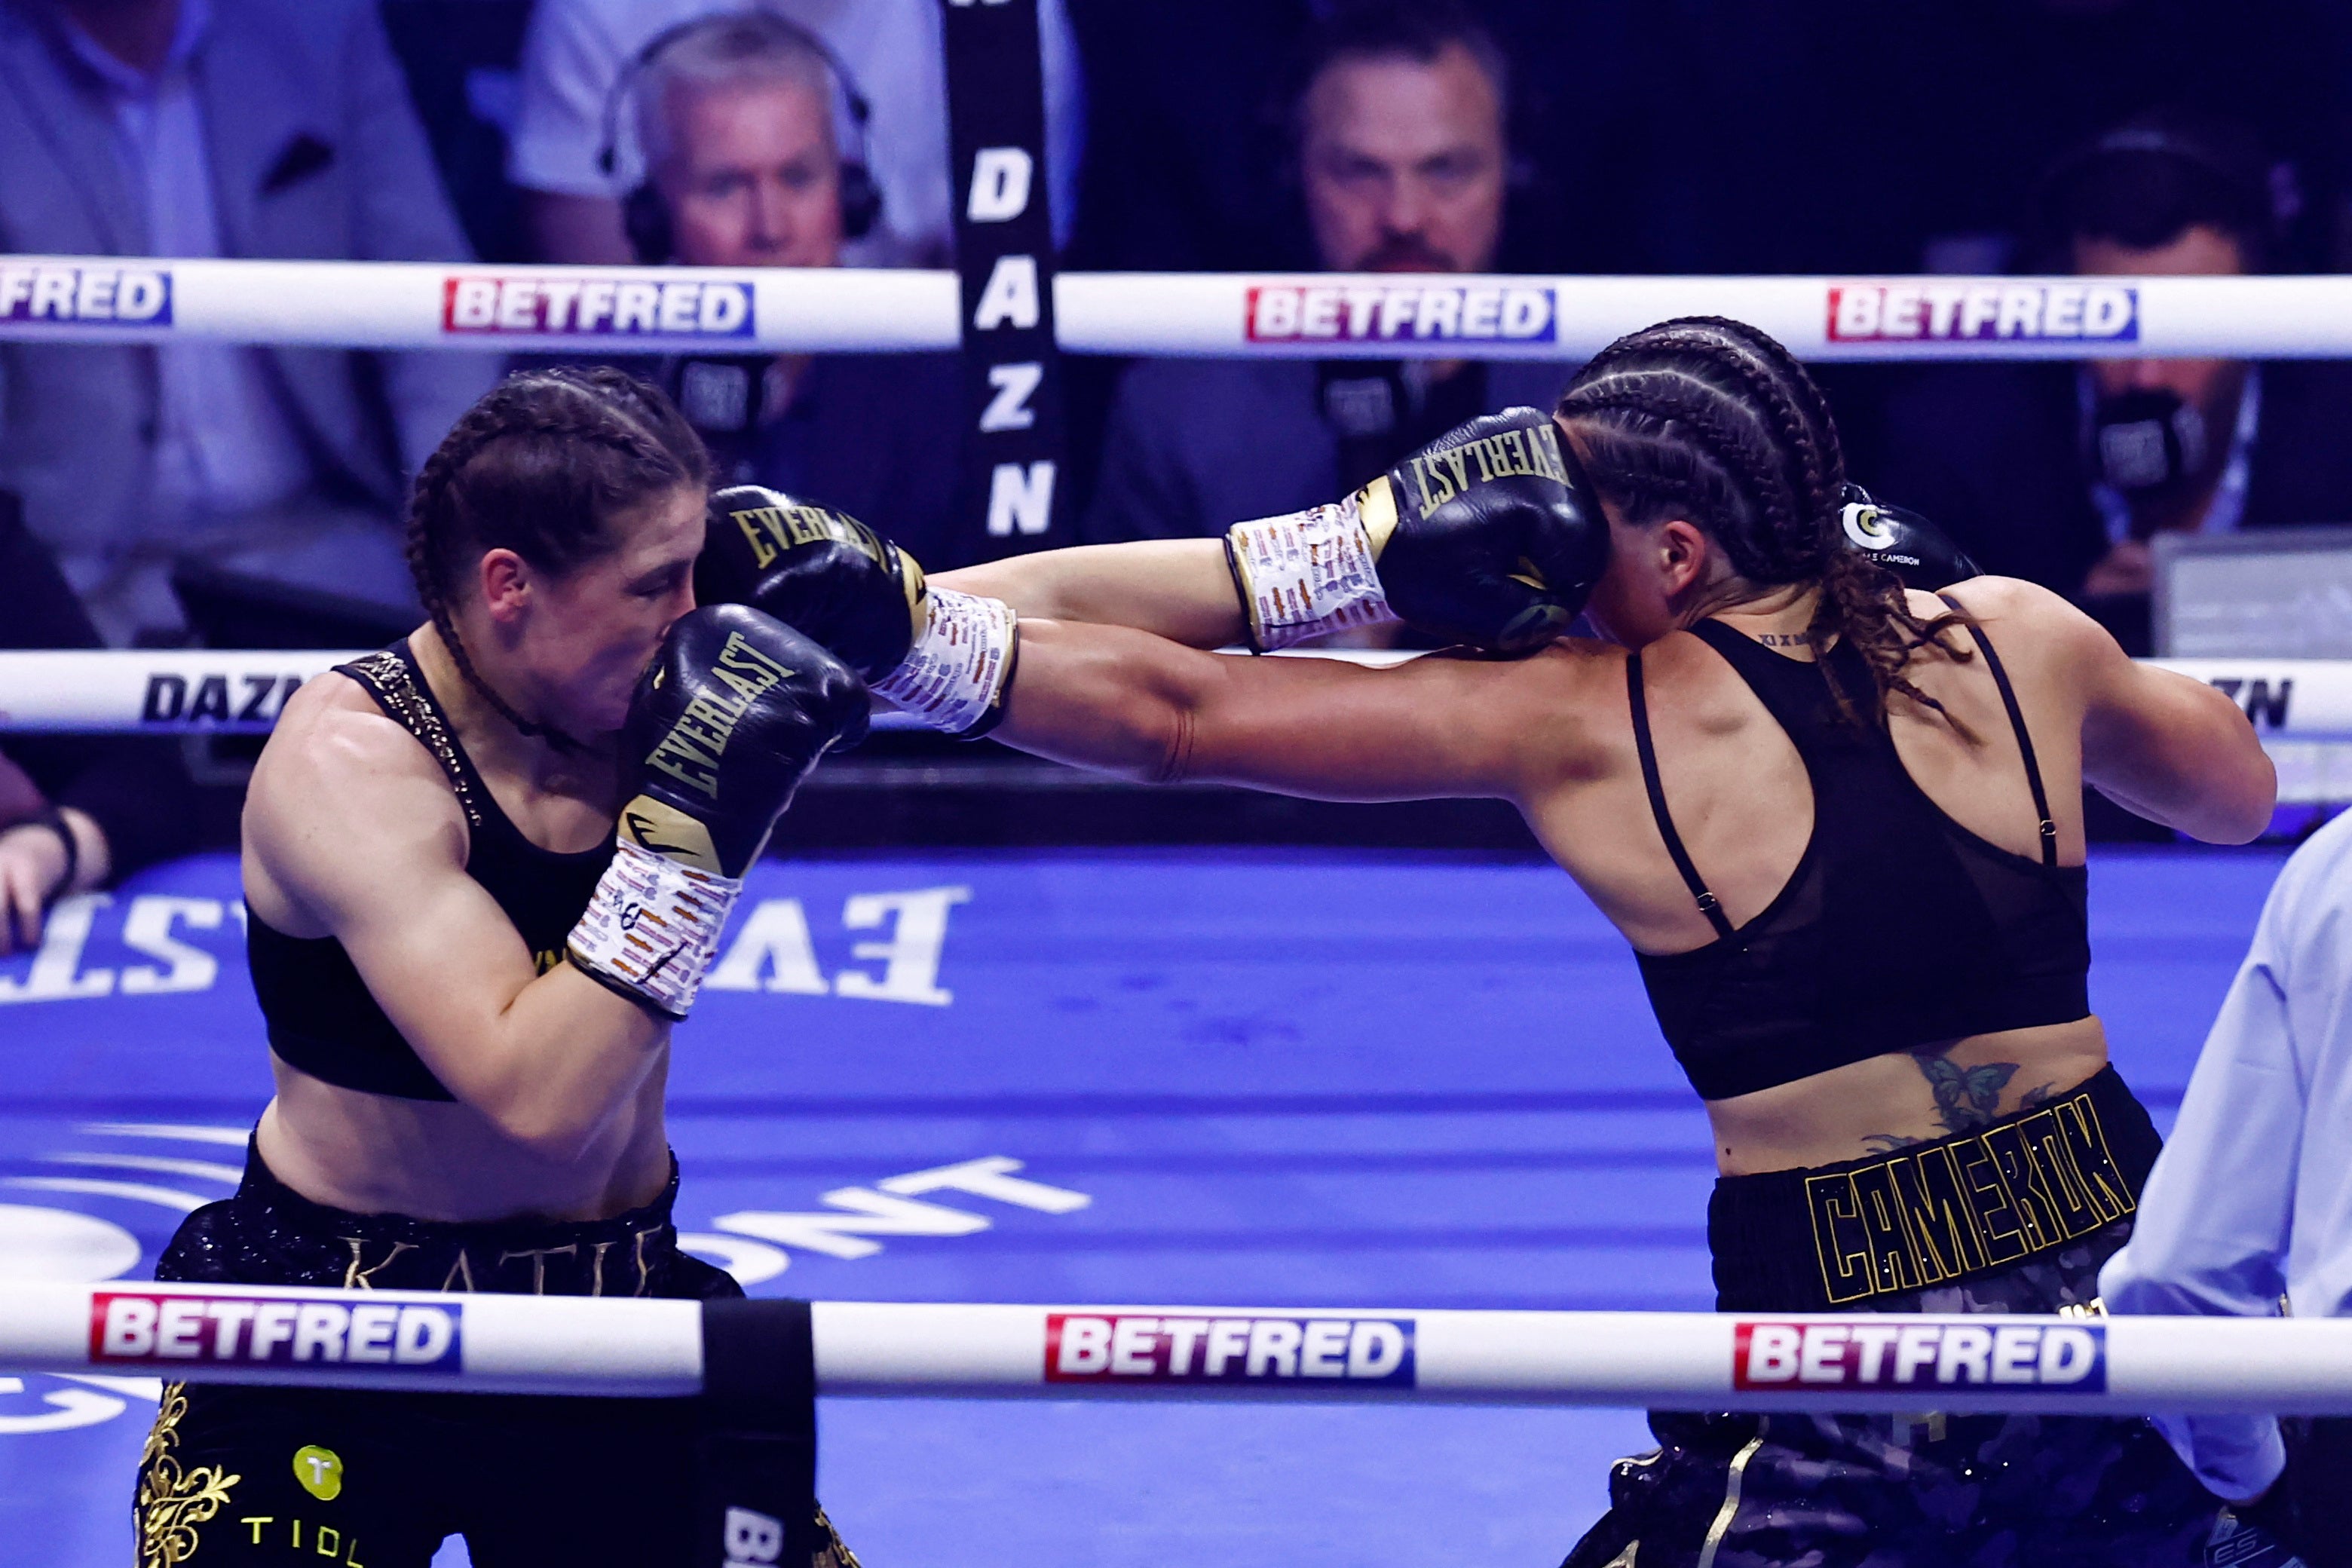 ‘I want my belts back, and I want revenge and redemption on Katie,’ says Cameron